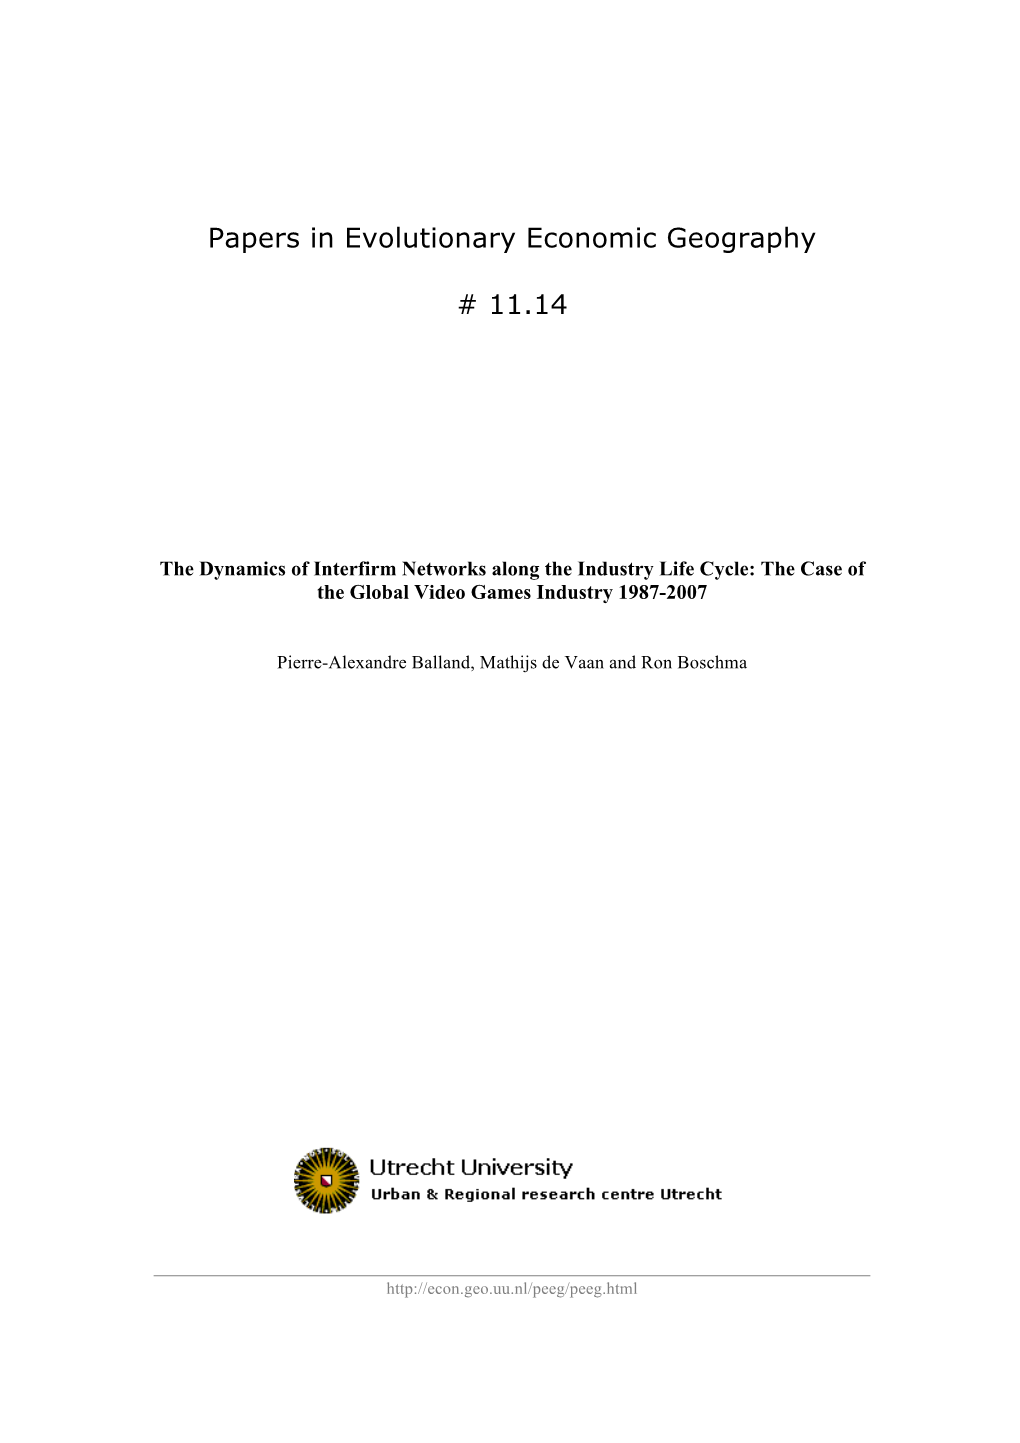 Papers in Evolutionary Economic Geography # 11.14